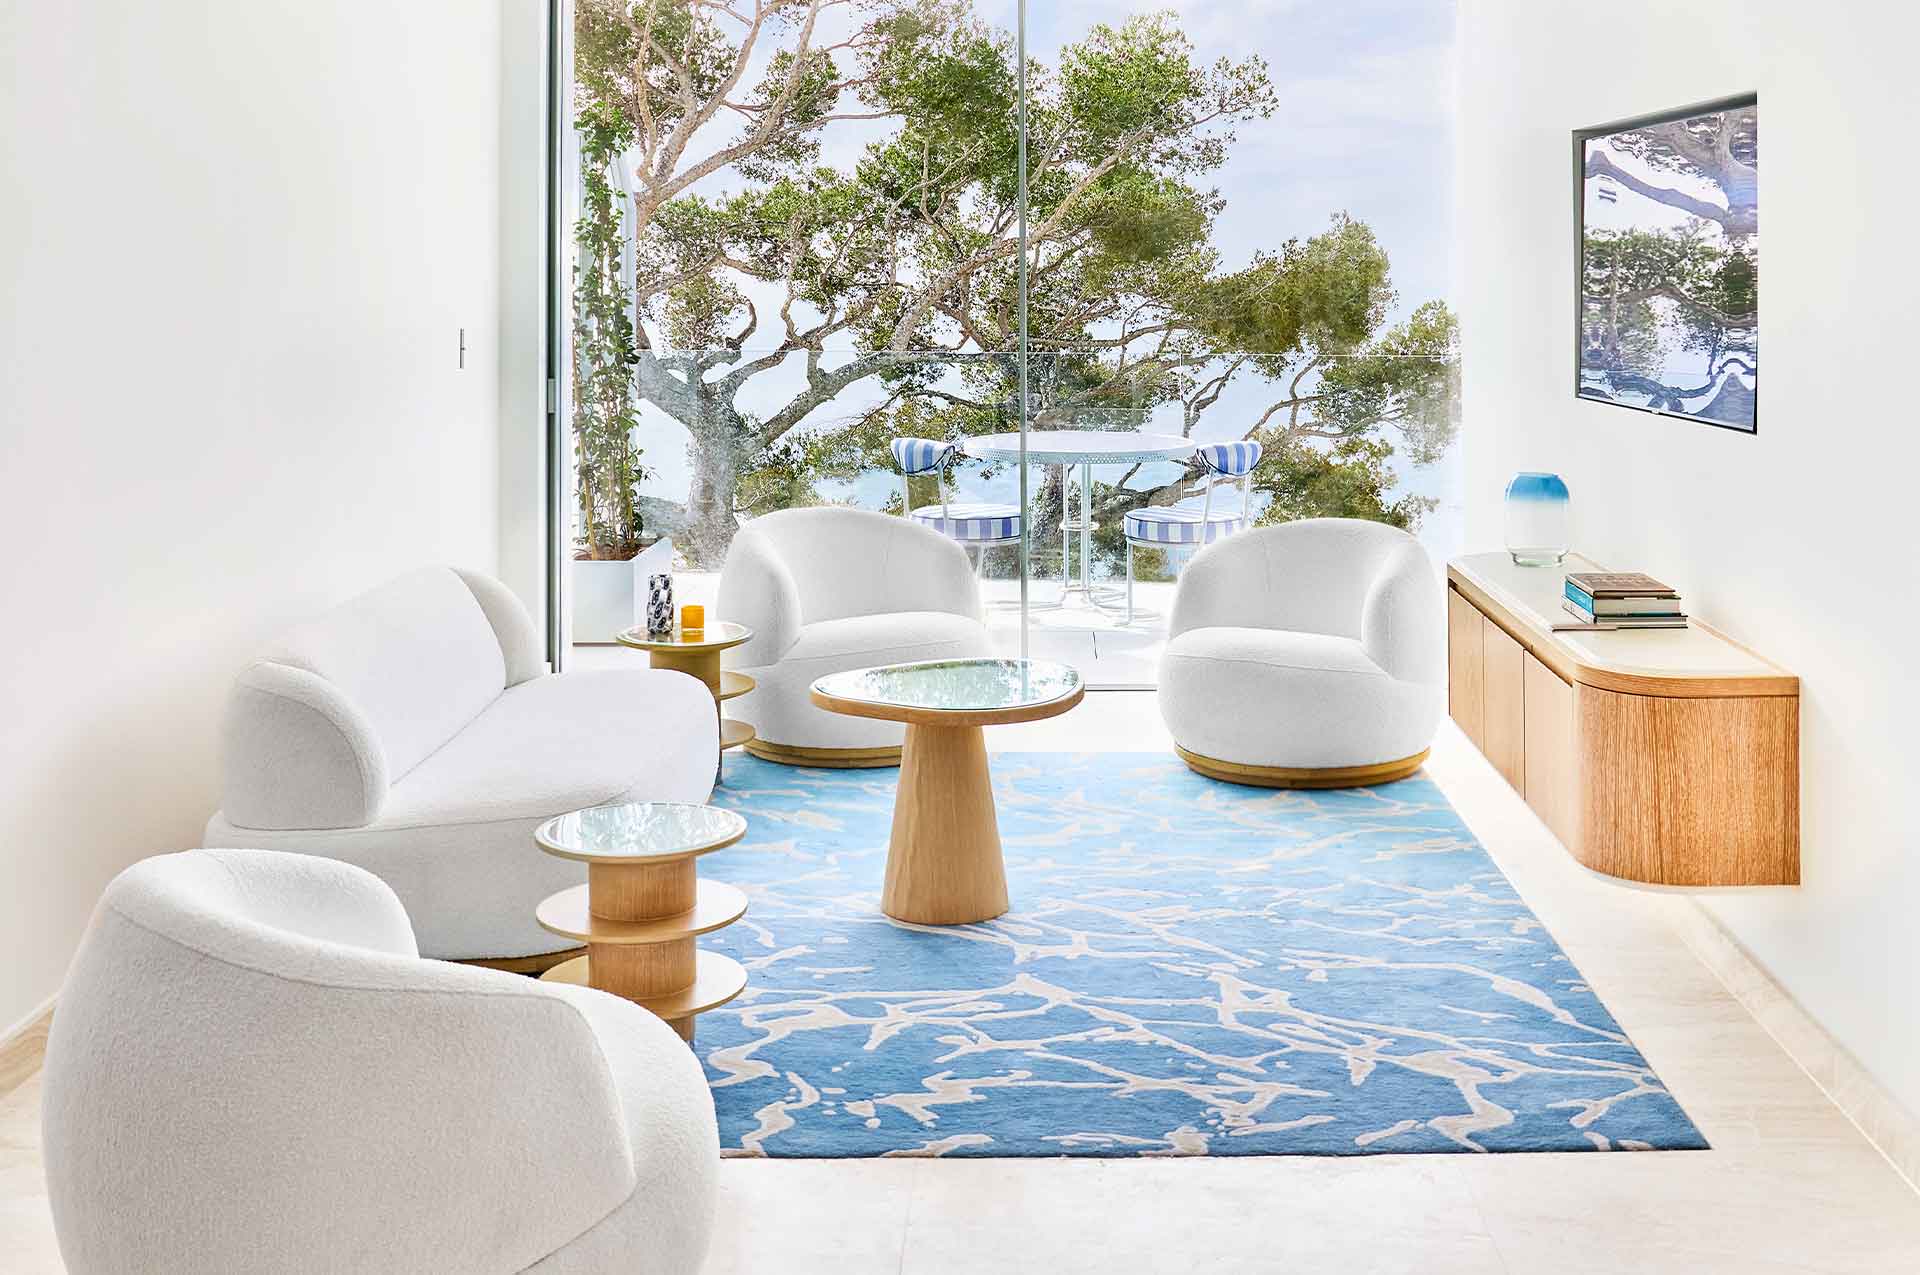 The Sea View Suite lounge features 4 grey rounded sofas and armchairs surrounding curved wooden tables and a large modern blue rug in the centre. The balcony showcases blue and white striped chairs overlooking the view.